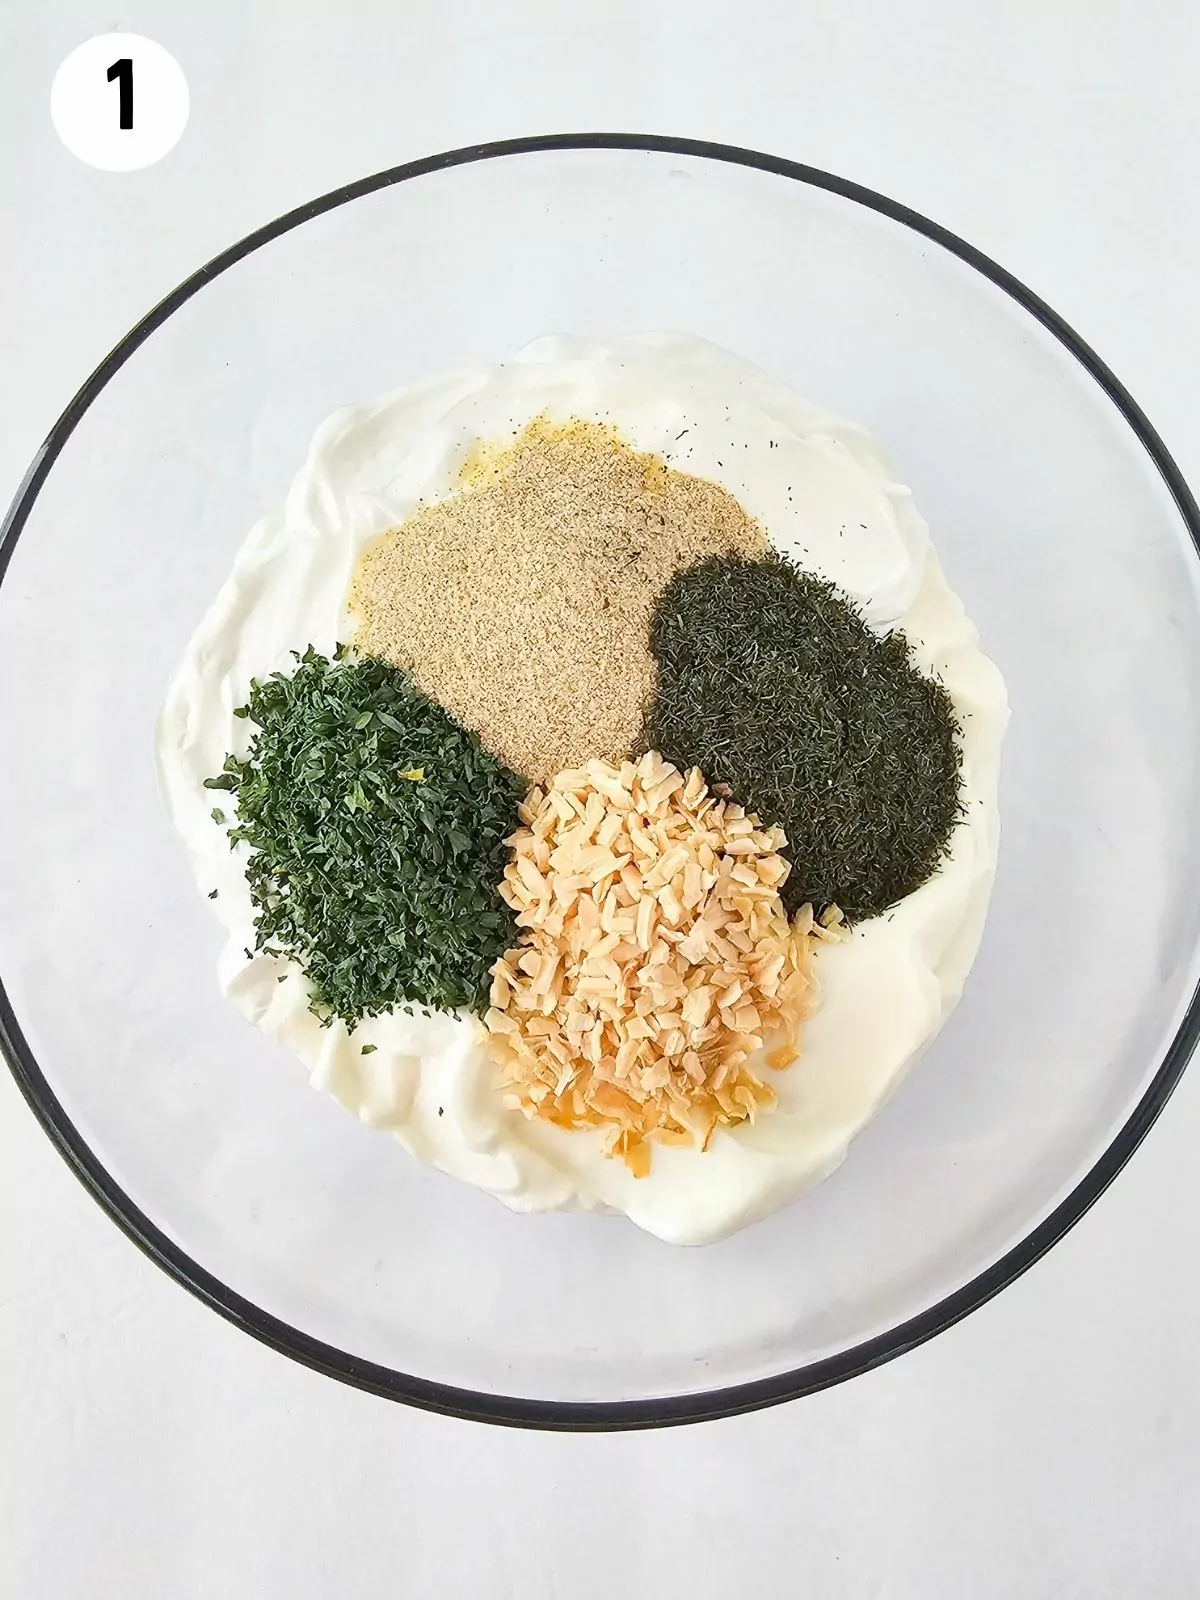 Seasonings on top of sour cream and mayonnaise in bowl.